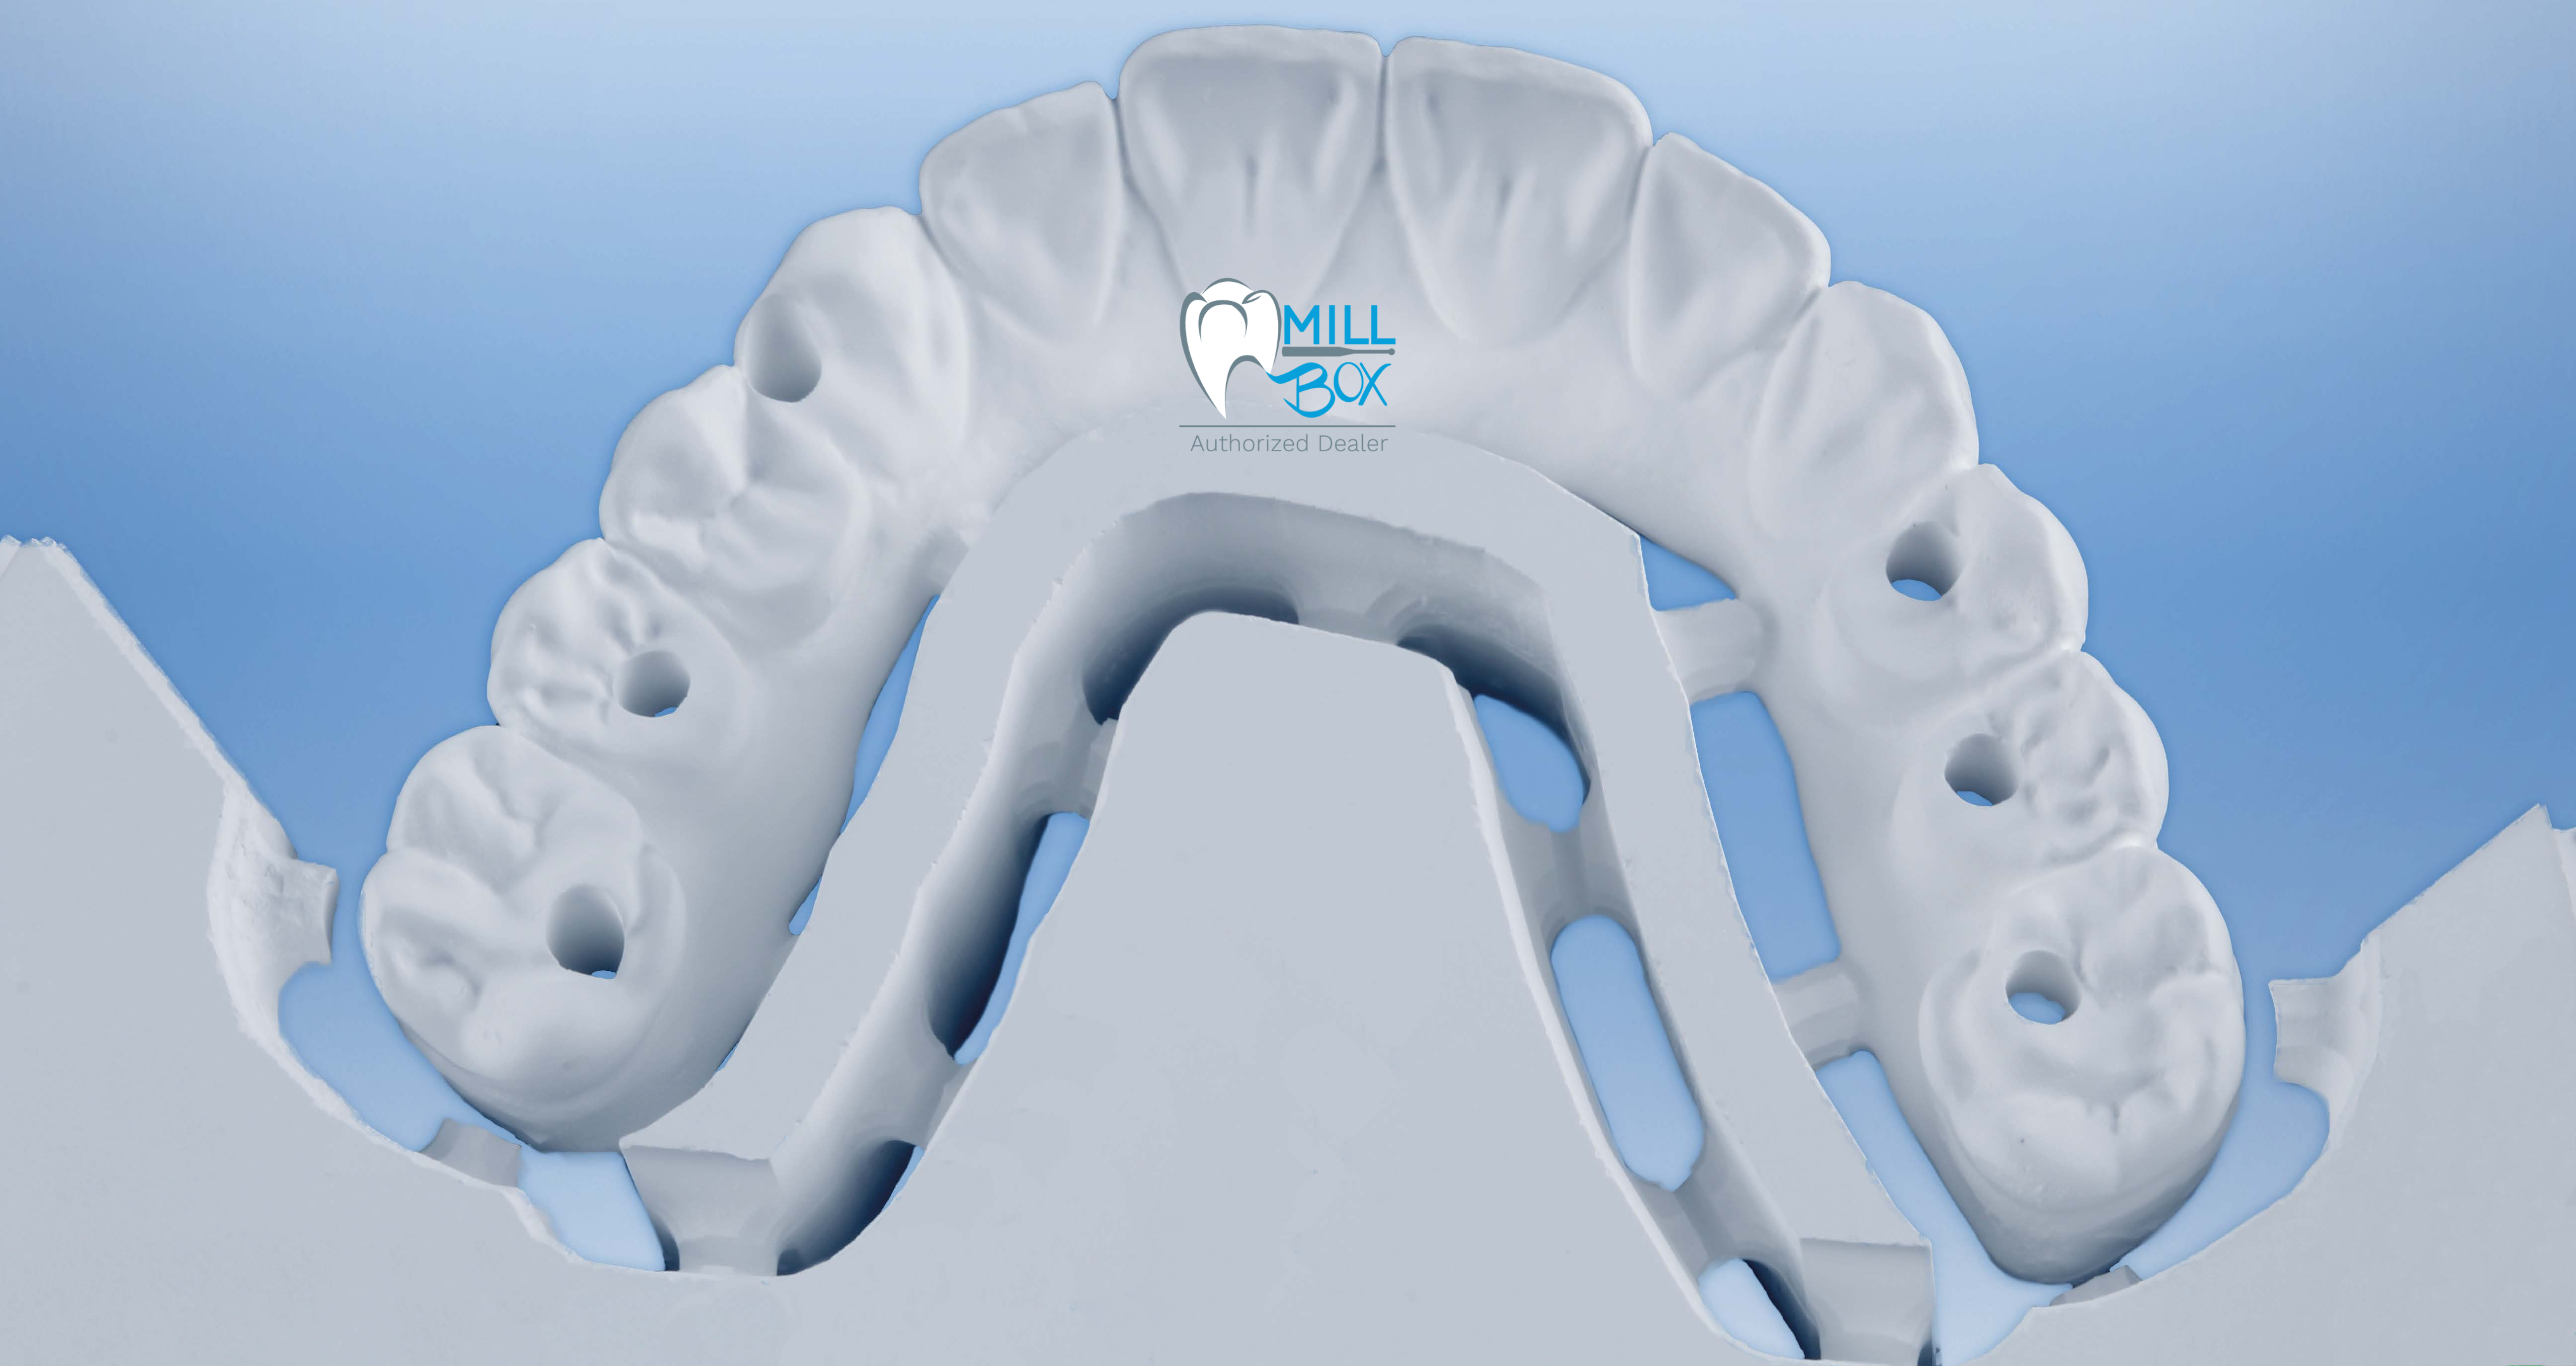 Image shows dental milling path with MillBox by CIMSystem